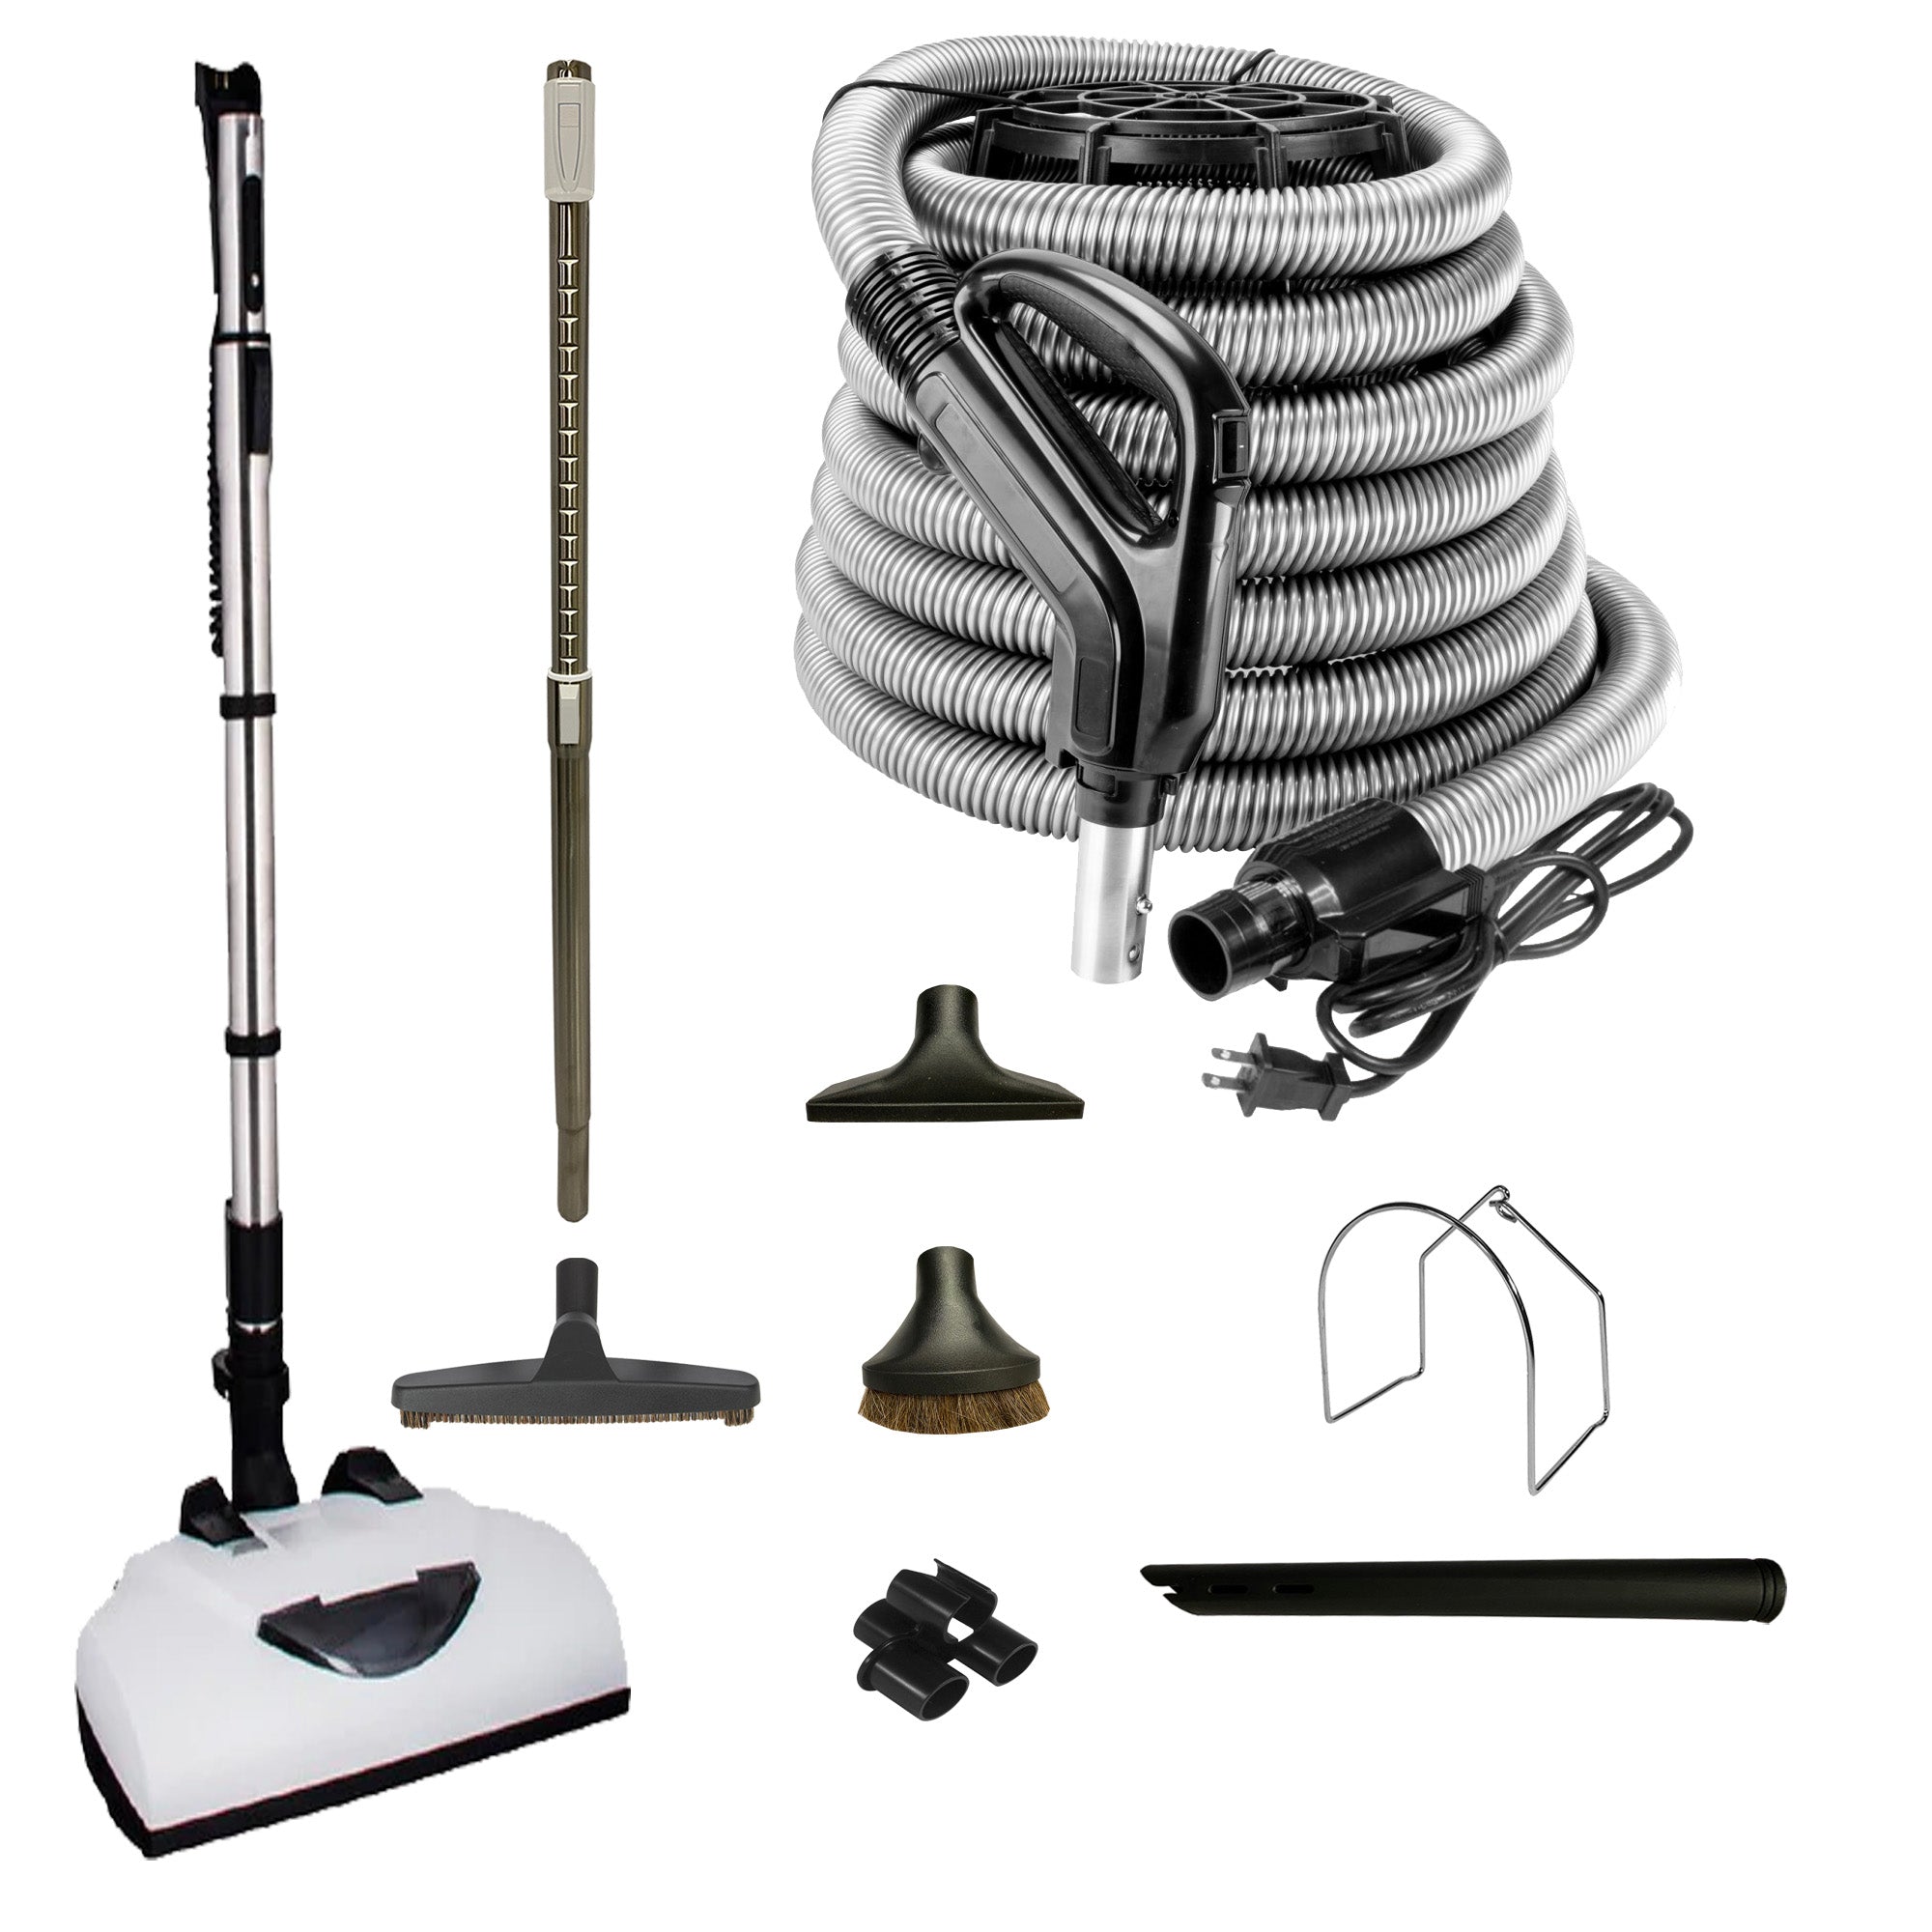 Wessel Werk Central Vacuum Accessory Kit with Telescopic Wand and Deluxe Tool Set - Black